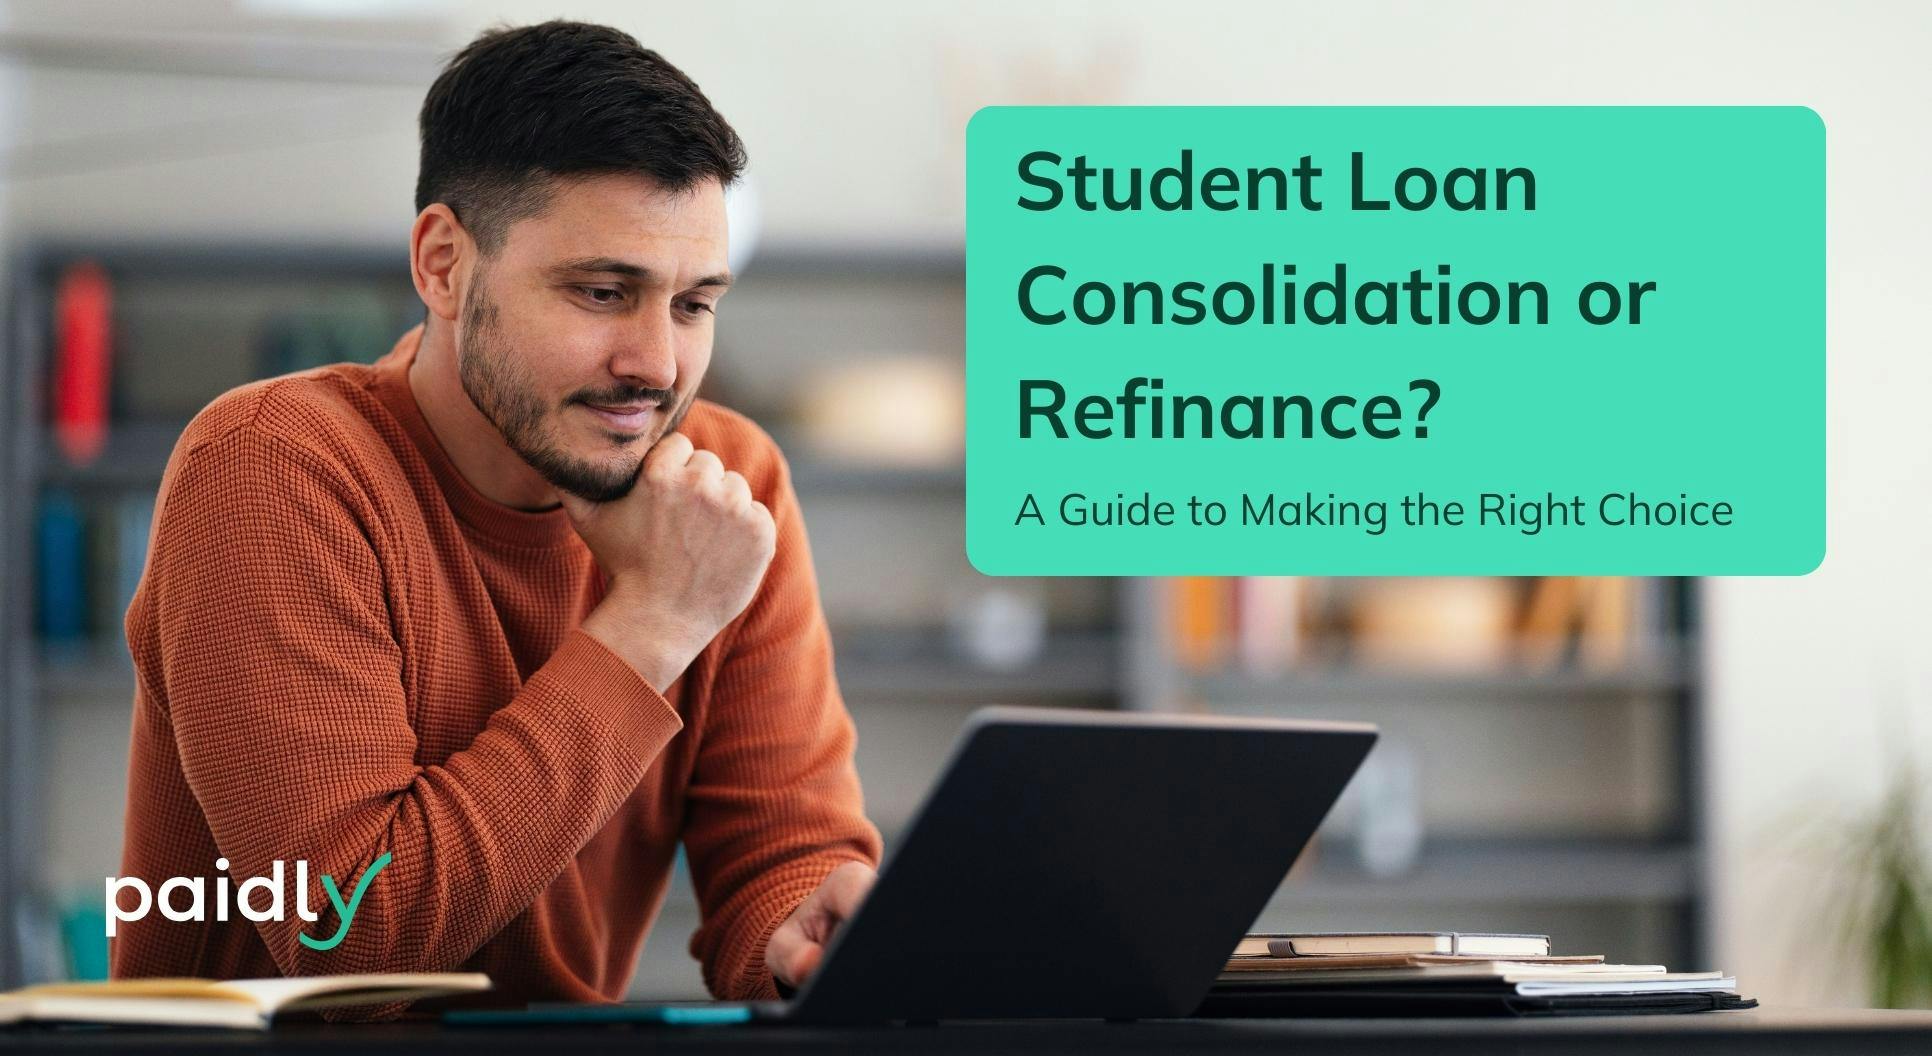 Student Loan Consolidation or Refinance, Man at Laptop Thinking, Paidly